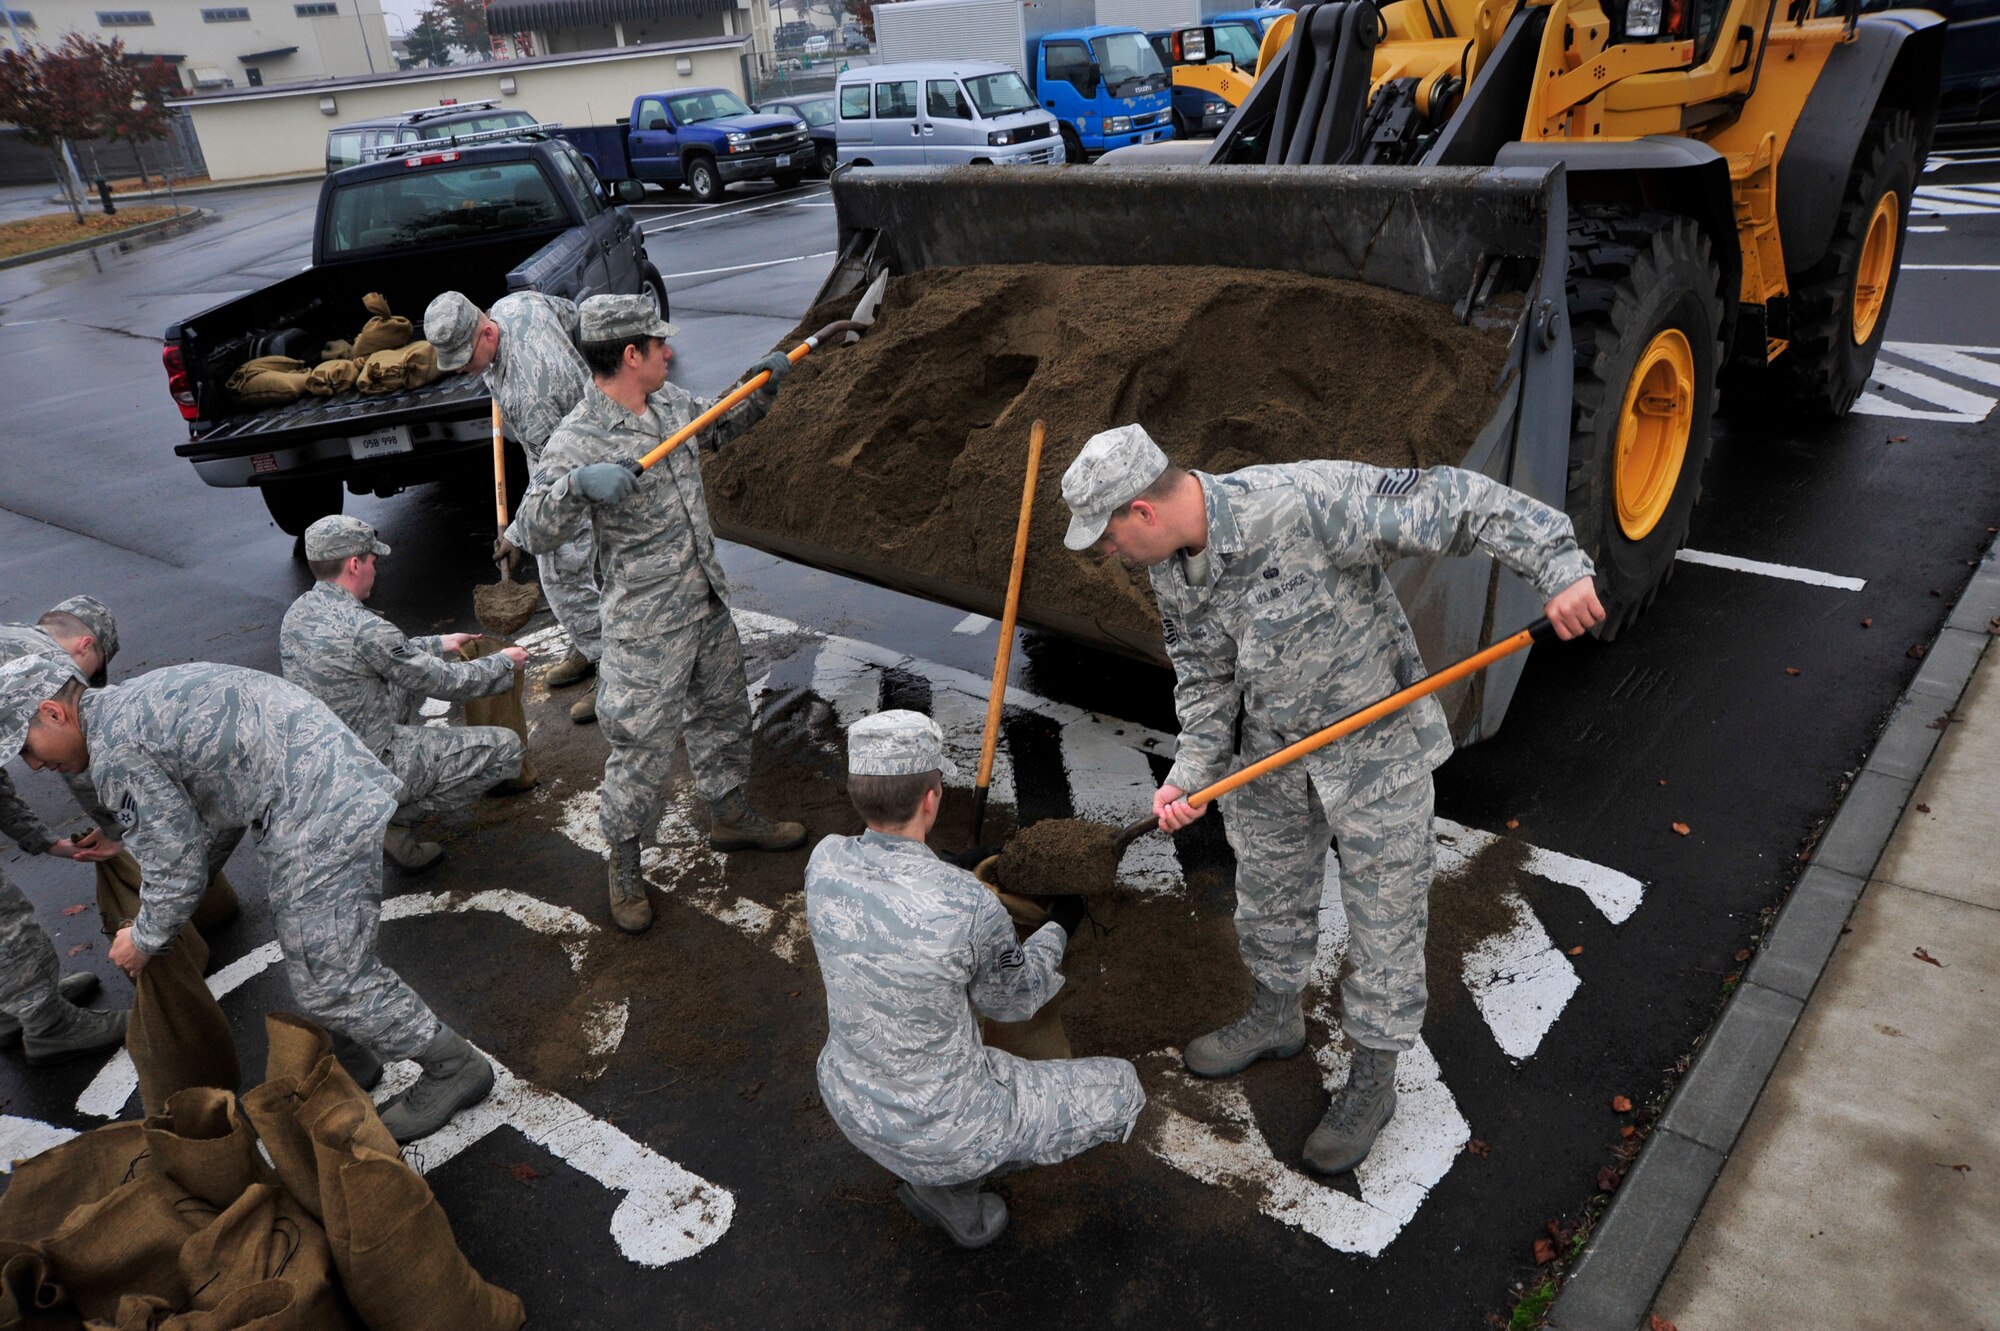 MISAWA AIR BASE, Japan – Members of the 35th Communications Squadron fill sand bags during an operational readiness exercise here Nov. 6. They are filling sandbags in order to protect buildings in case of simulated attack. The 35th Fighter Wing is currently going through an ORE in preparation for an operational readiness inspection in December. (U.S. Air Force photo/Staff Sgt. Nathan Lipscomb)